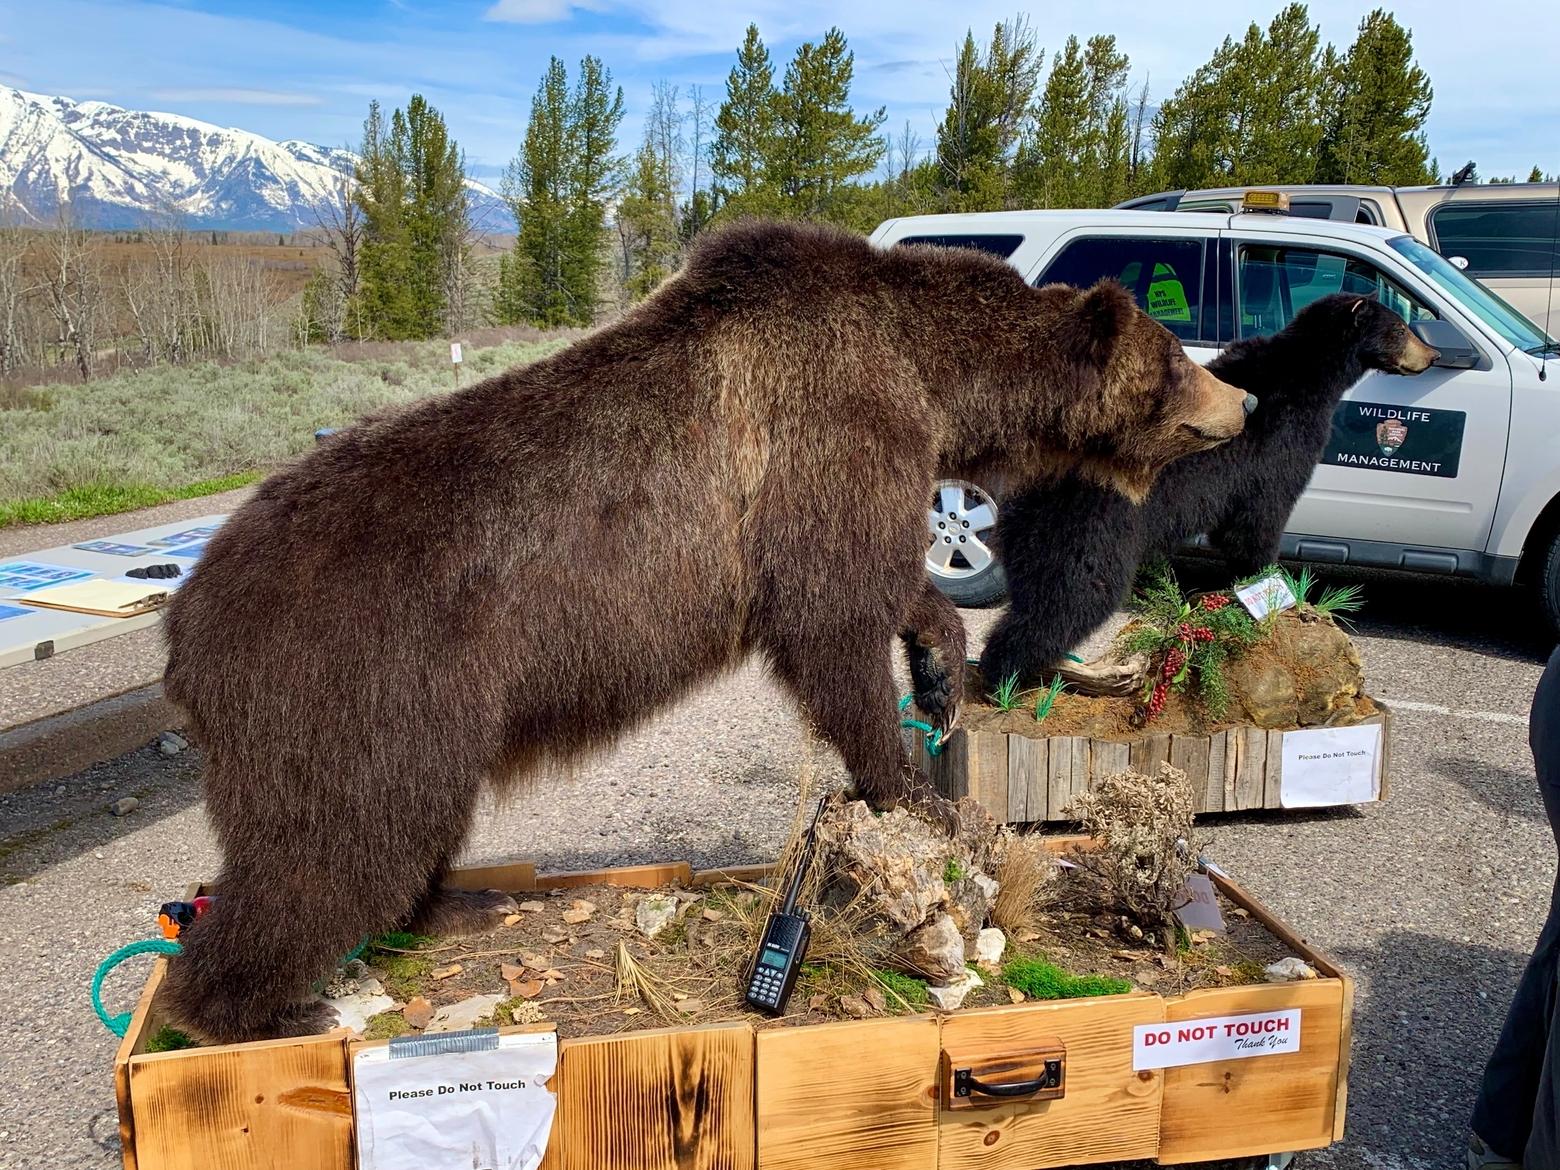 This grizzly is believed to have been #587, one of famed Jackson Hole Grizzly 399's original triplets and brother to sisters 610 and 615.  Grizzly 587 was lethally removed from the wild as a young bear after he was accused of preying on livestock. Sister 615 died after being shot  by a hunter in the Bridger-Teton National Forest who claimed she was behaving aggressively but who was convicted  of illegally killing her.  Lots of grizzlies die every year in all kinds of run-ins with humans. If Wyoming brings back a sport hunt of grizzlies, bears like this will be pursued as trophies. Today, 587, portrayed in this pose by a taxidermist, is part of public education efforts to make people in northwest Wyoming more aware about living and playing in grizzly country. Photo by Todd Wilkinson